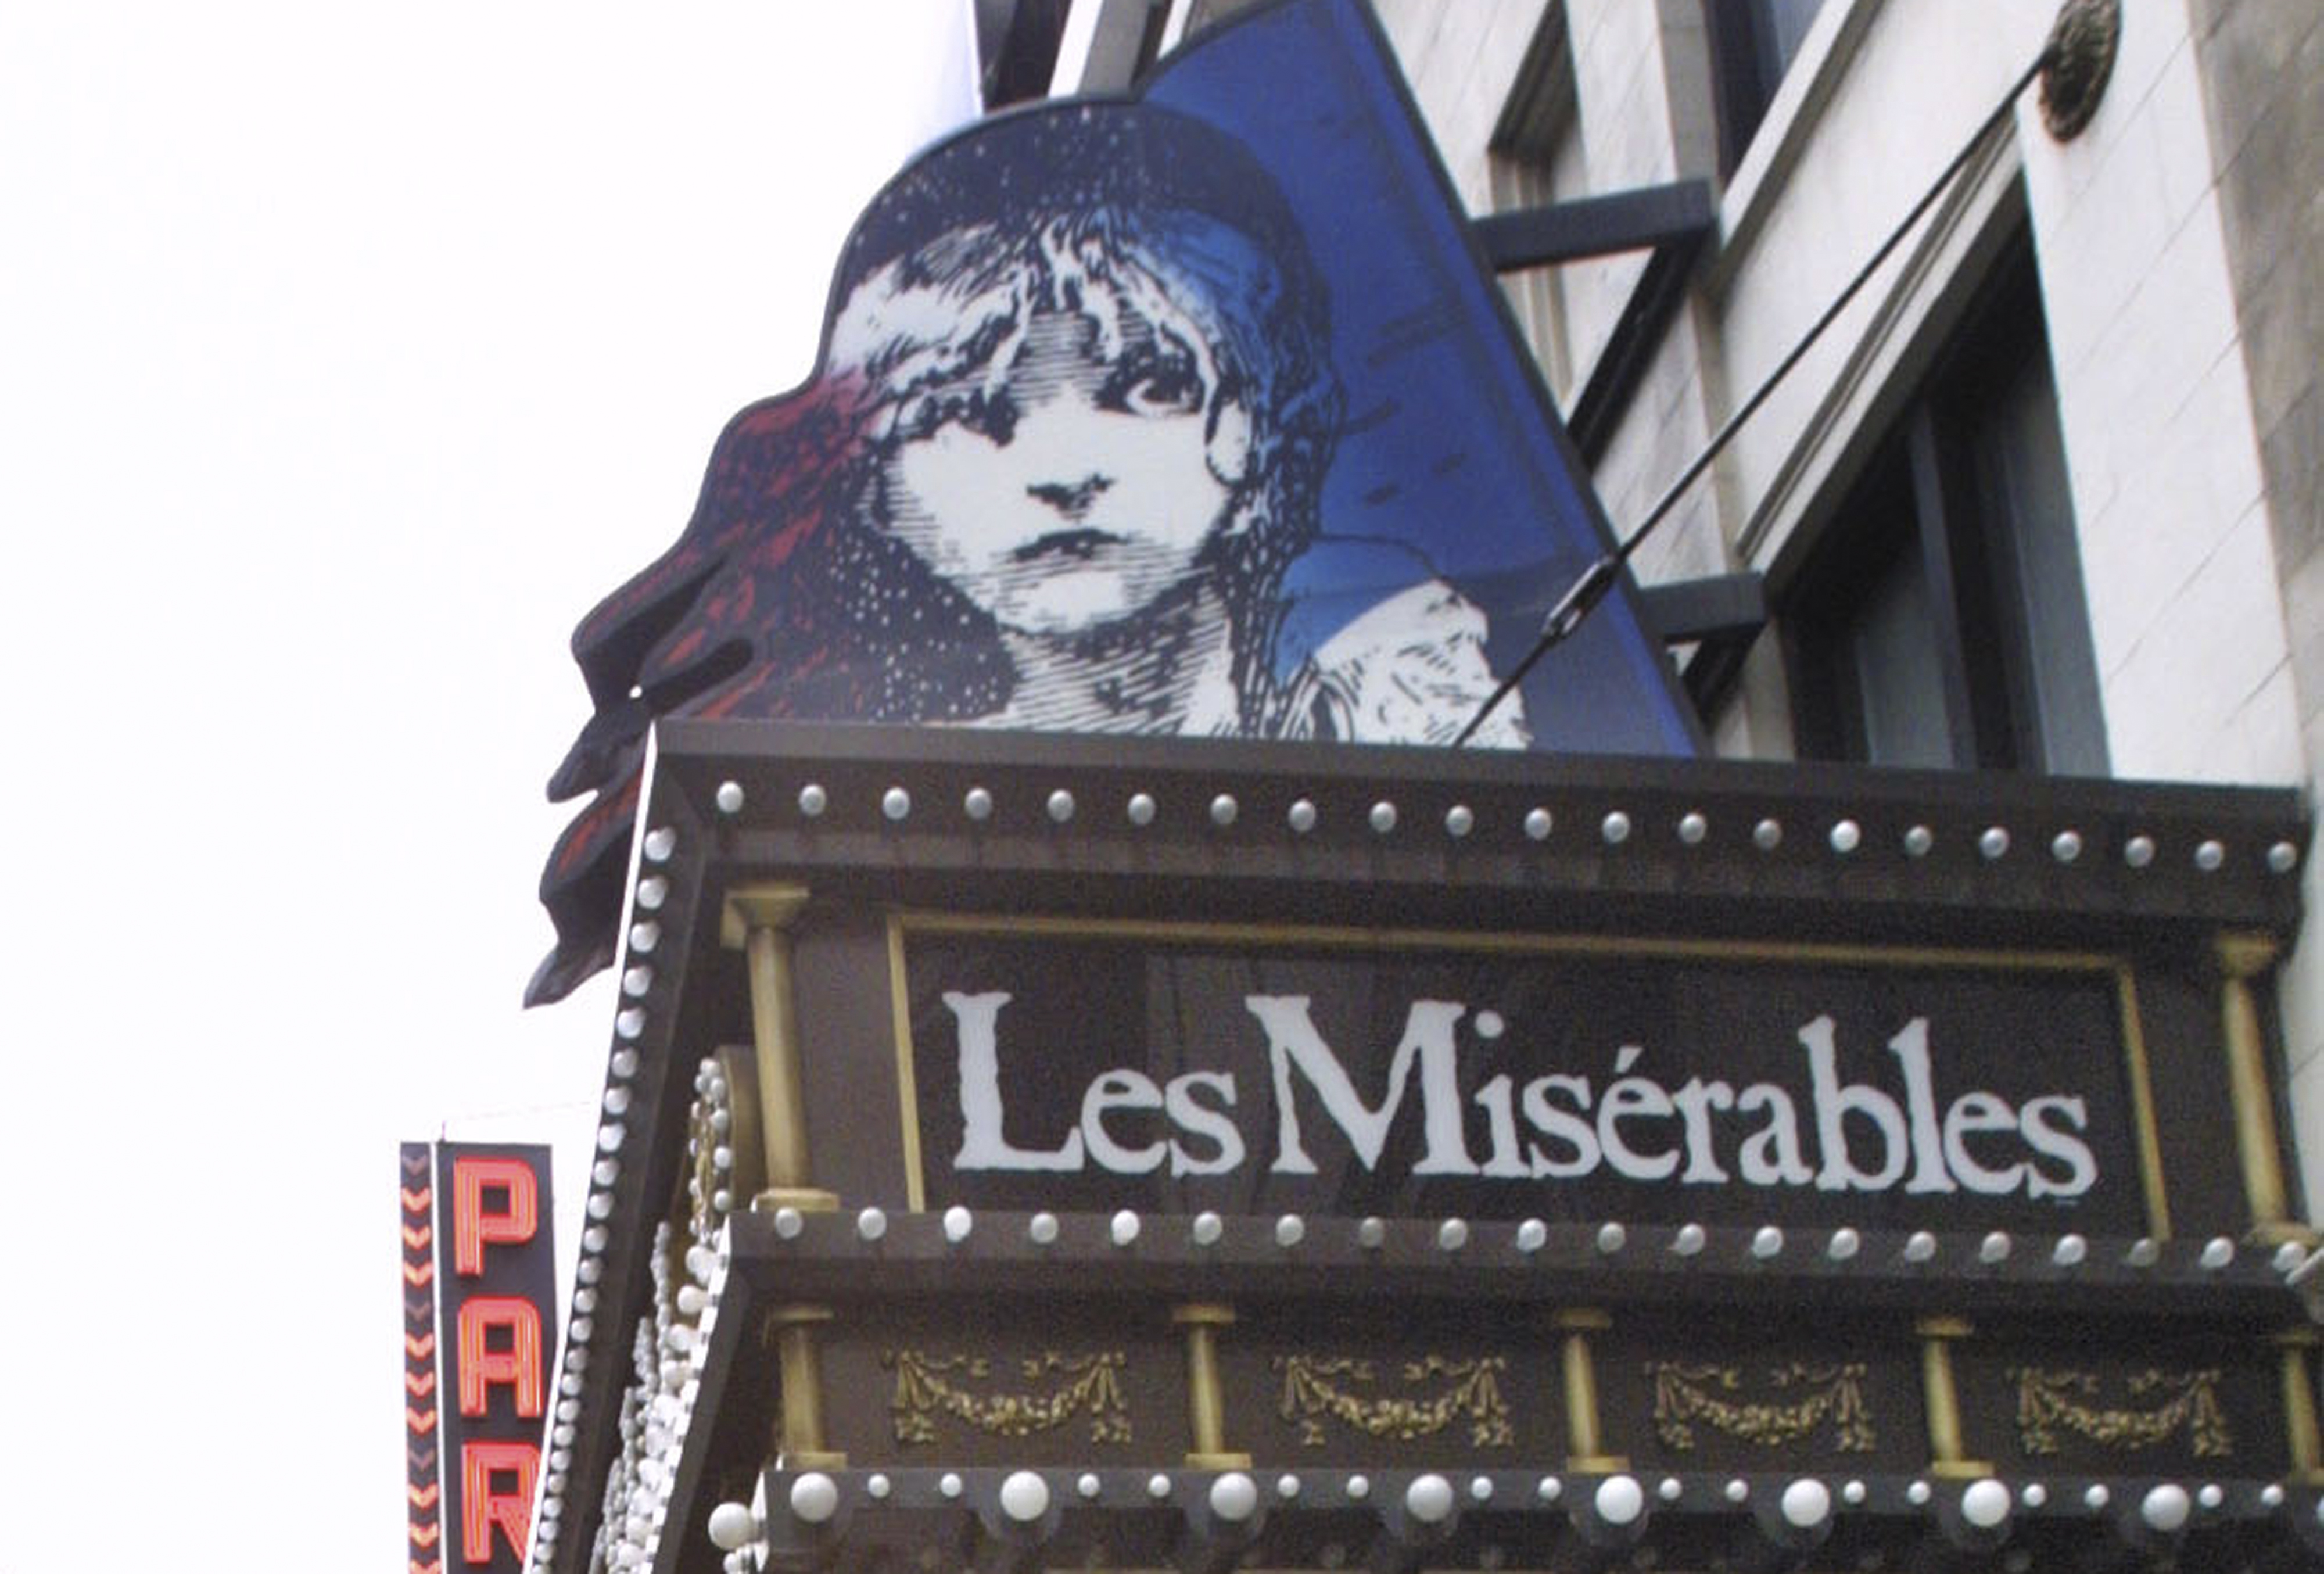 Amarquee displays the advertisement for theater show Les Miserables, in New York on March 11, 2003. (Tina Fineberg—AP)